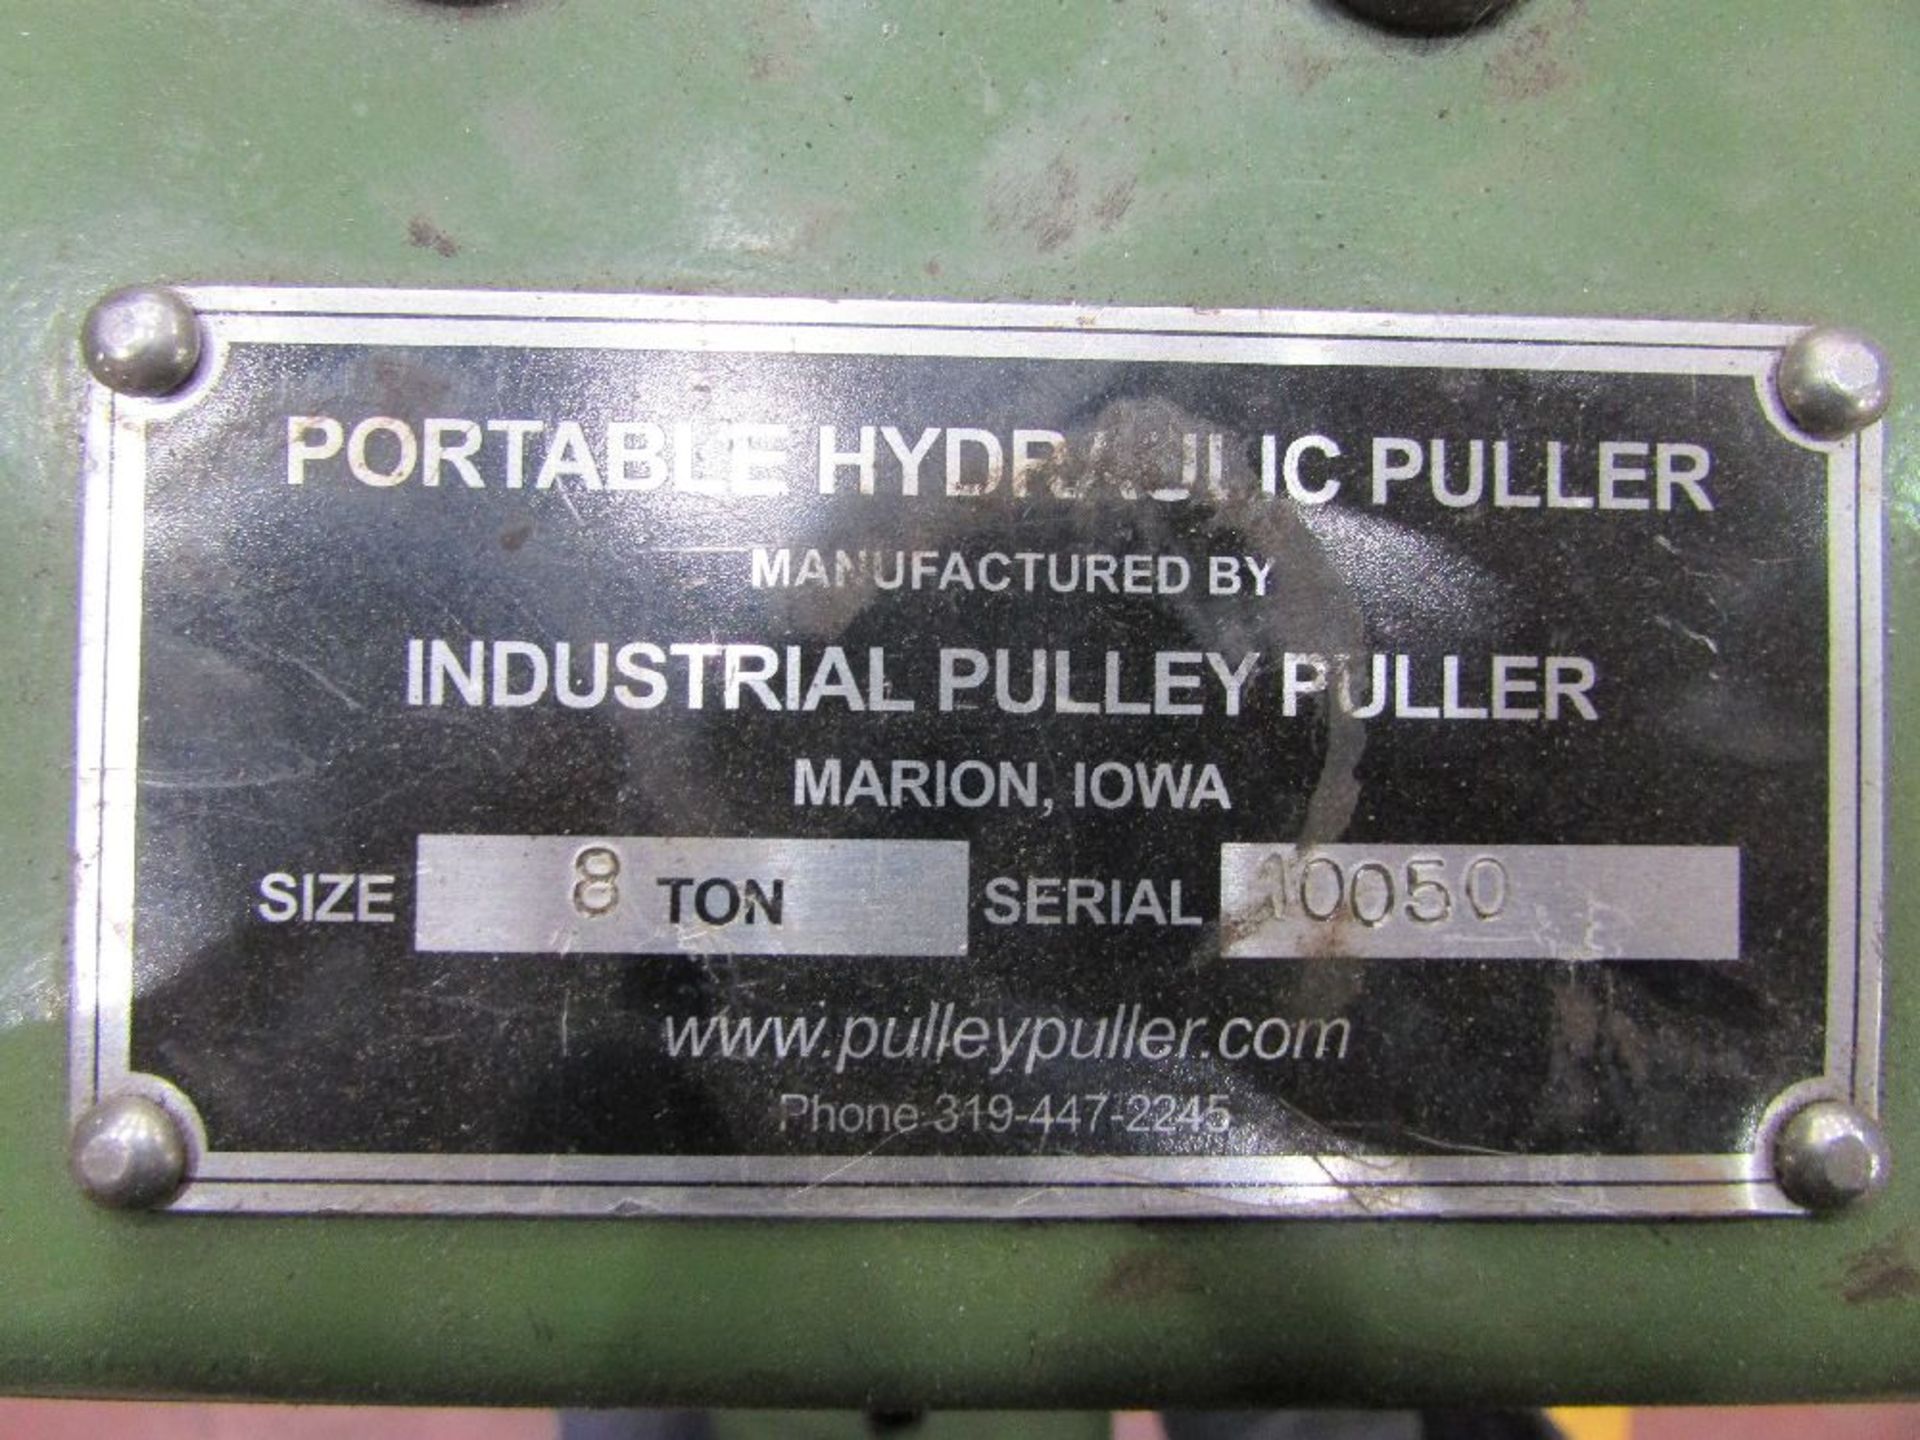 Industrial Pulley Puller 8 Ton Portable Hydraulic Puller - Image 6 of 6